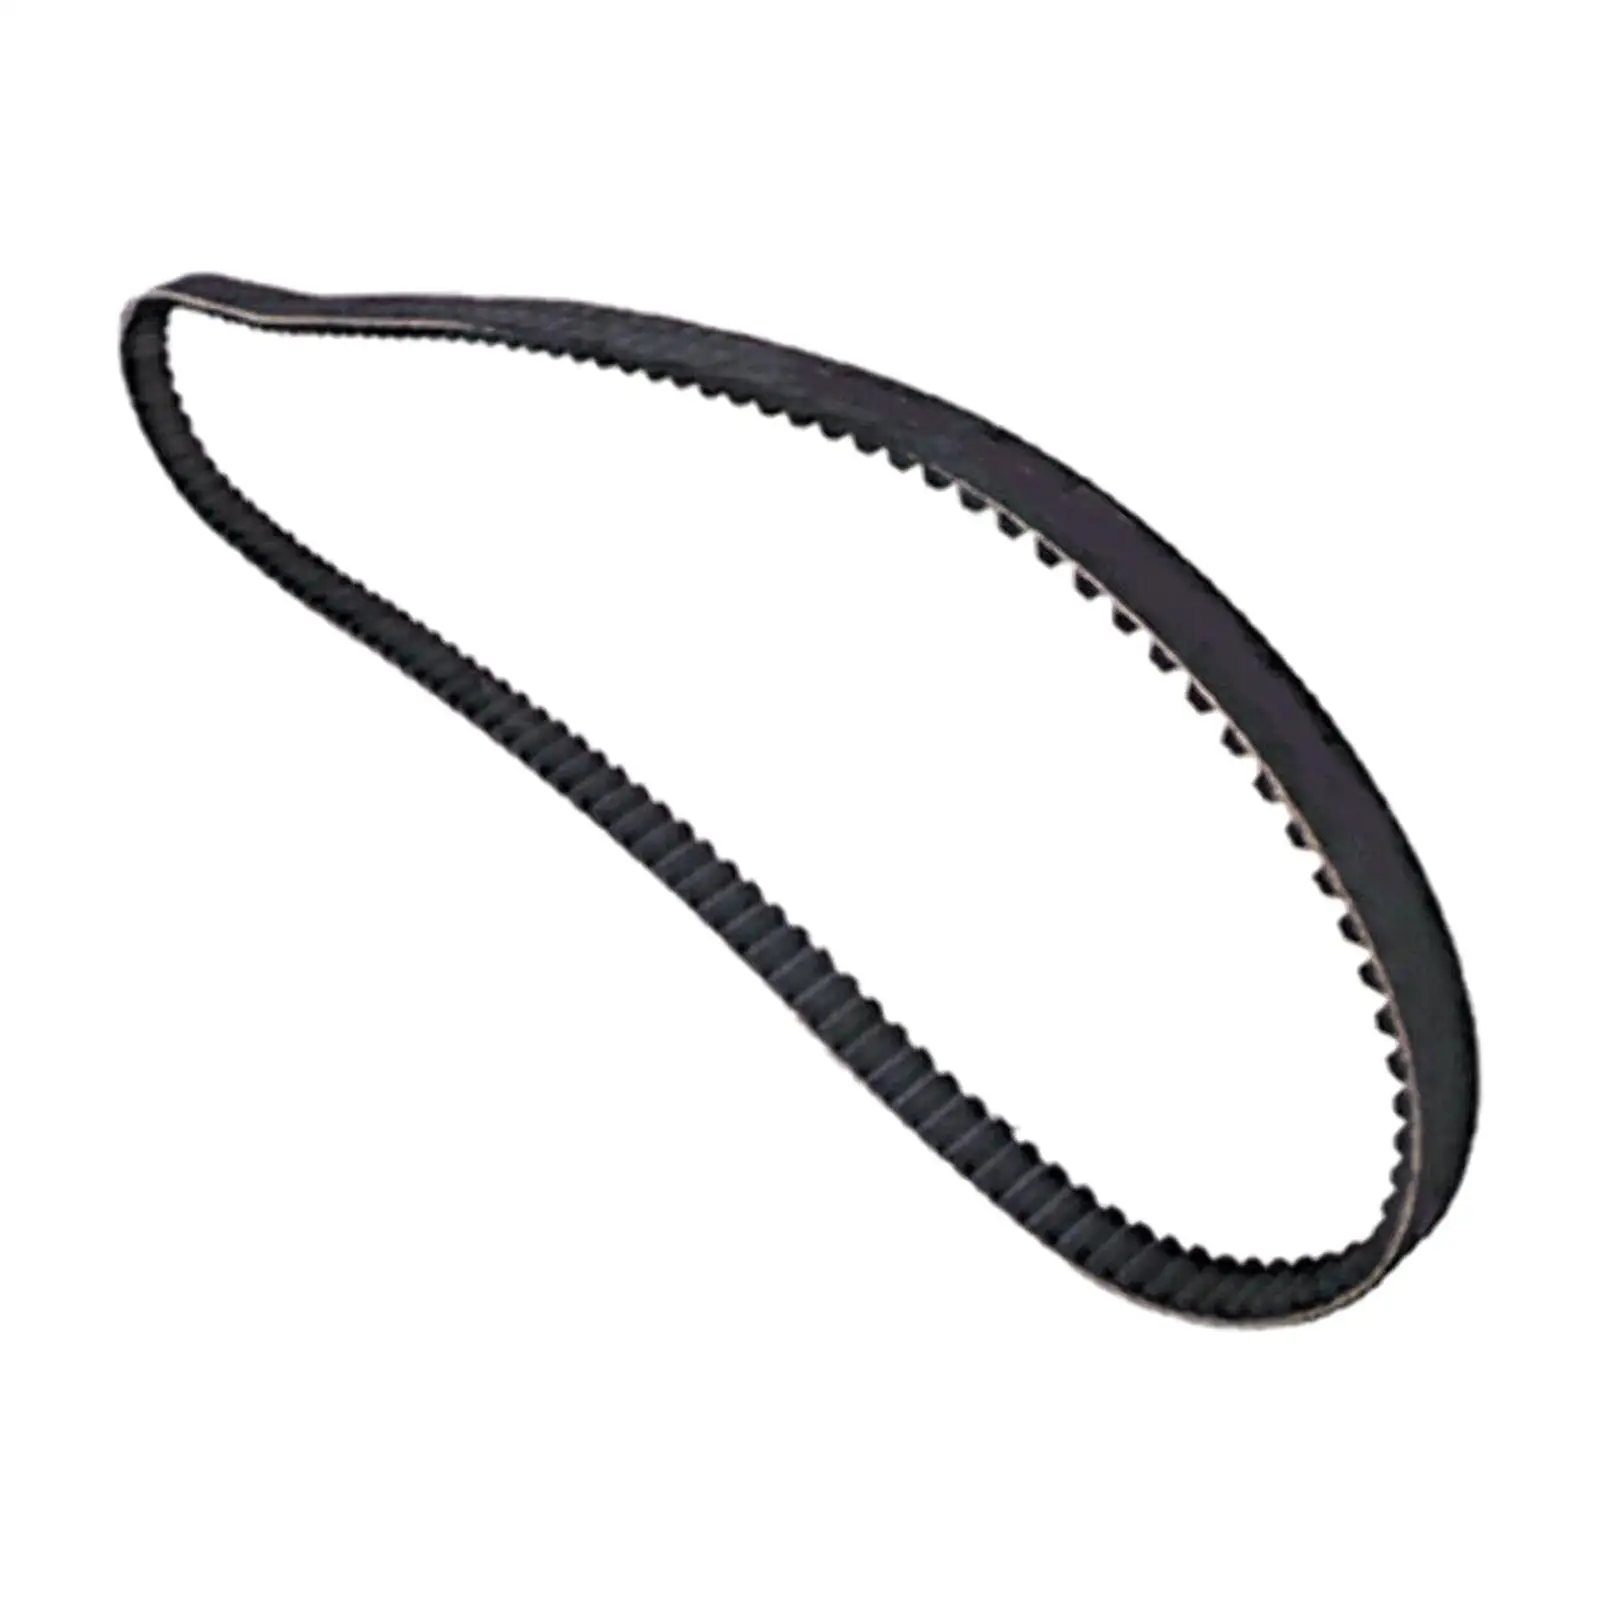 Rear Drive Belt Rubber Motorcycle Accessories 133 Tooth 1 1/8